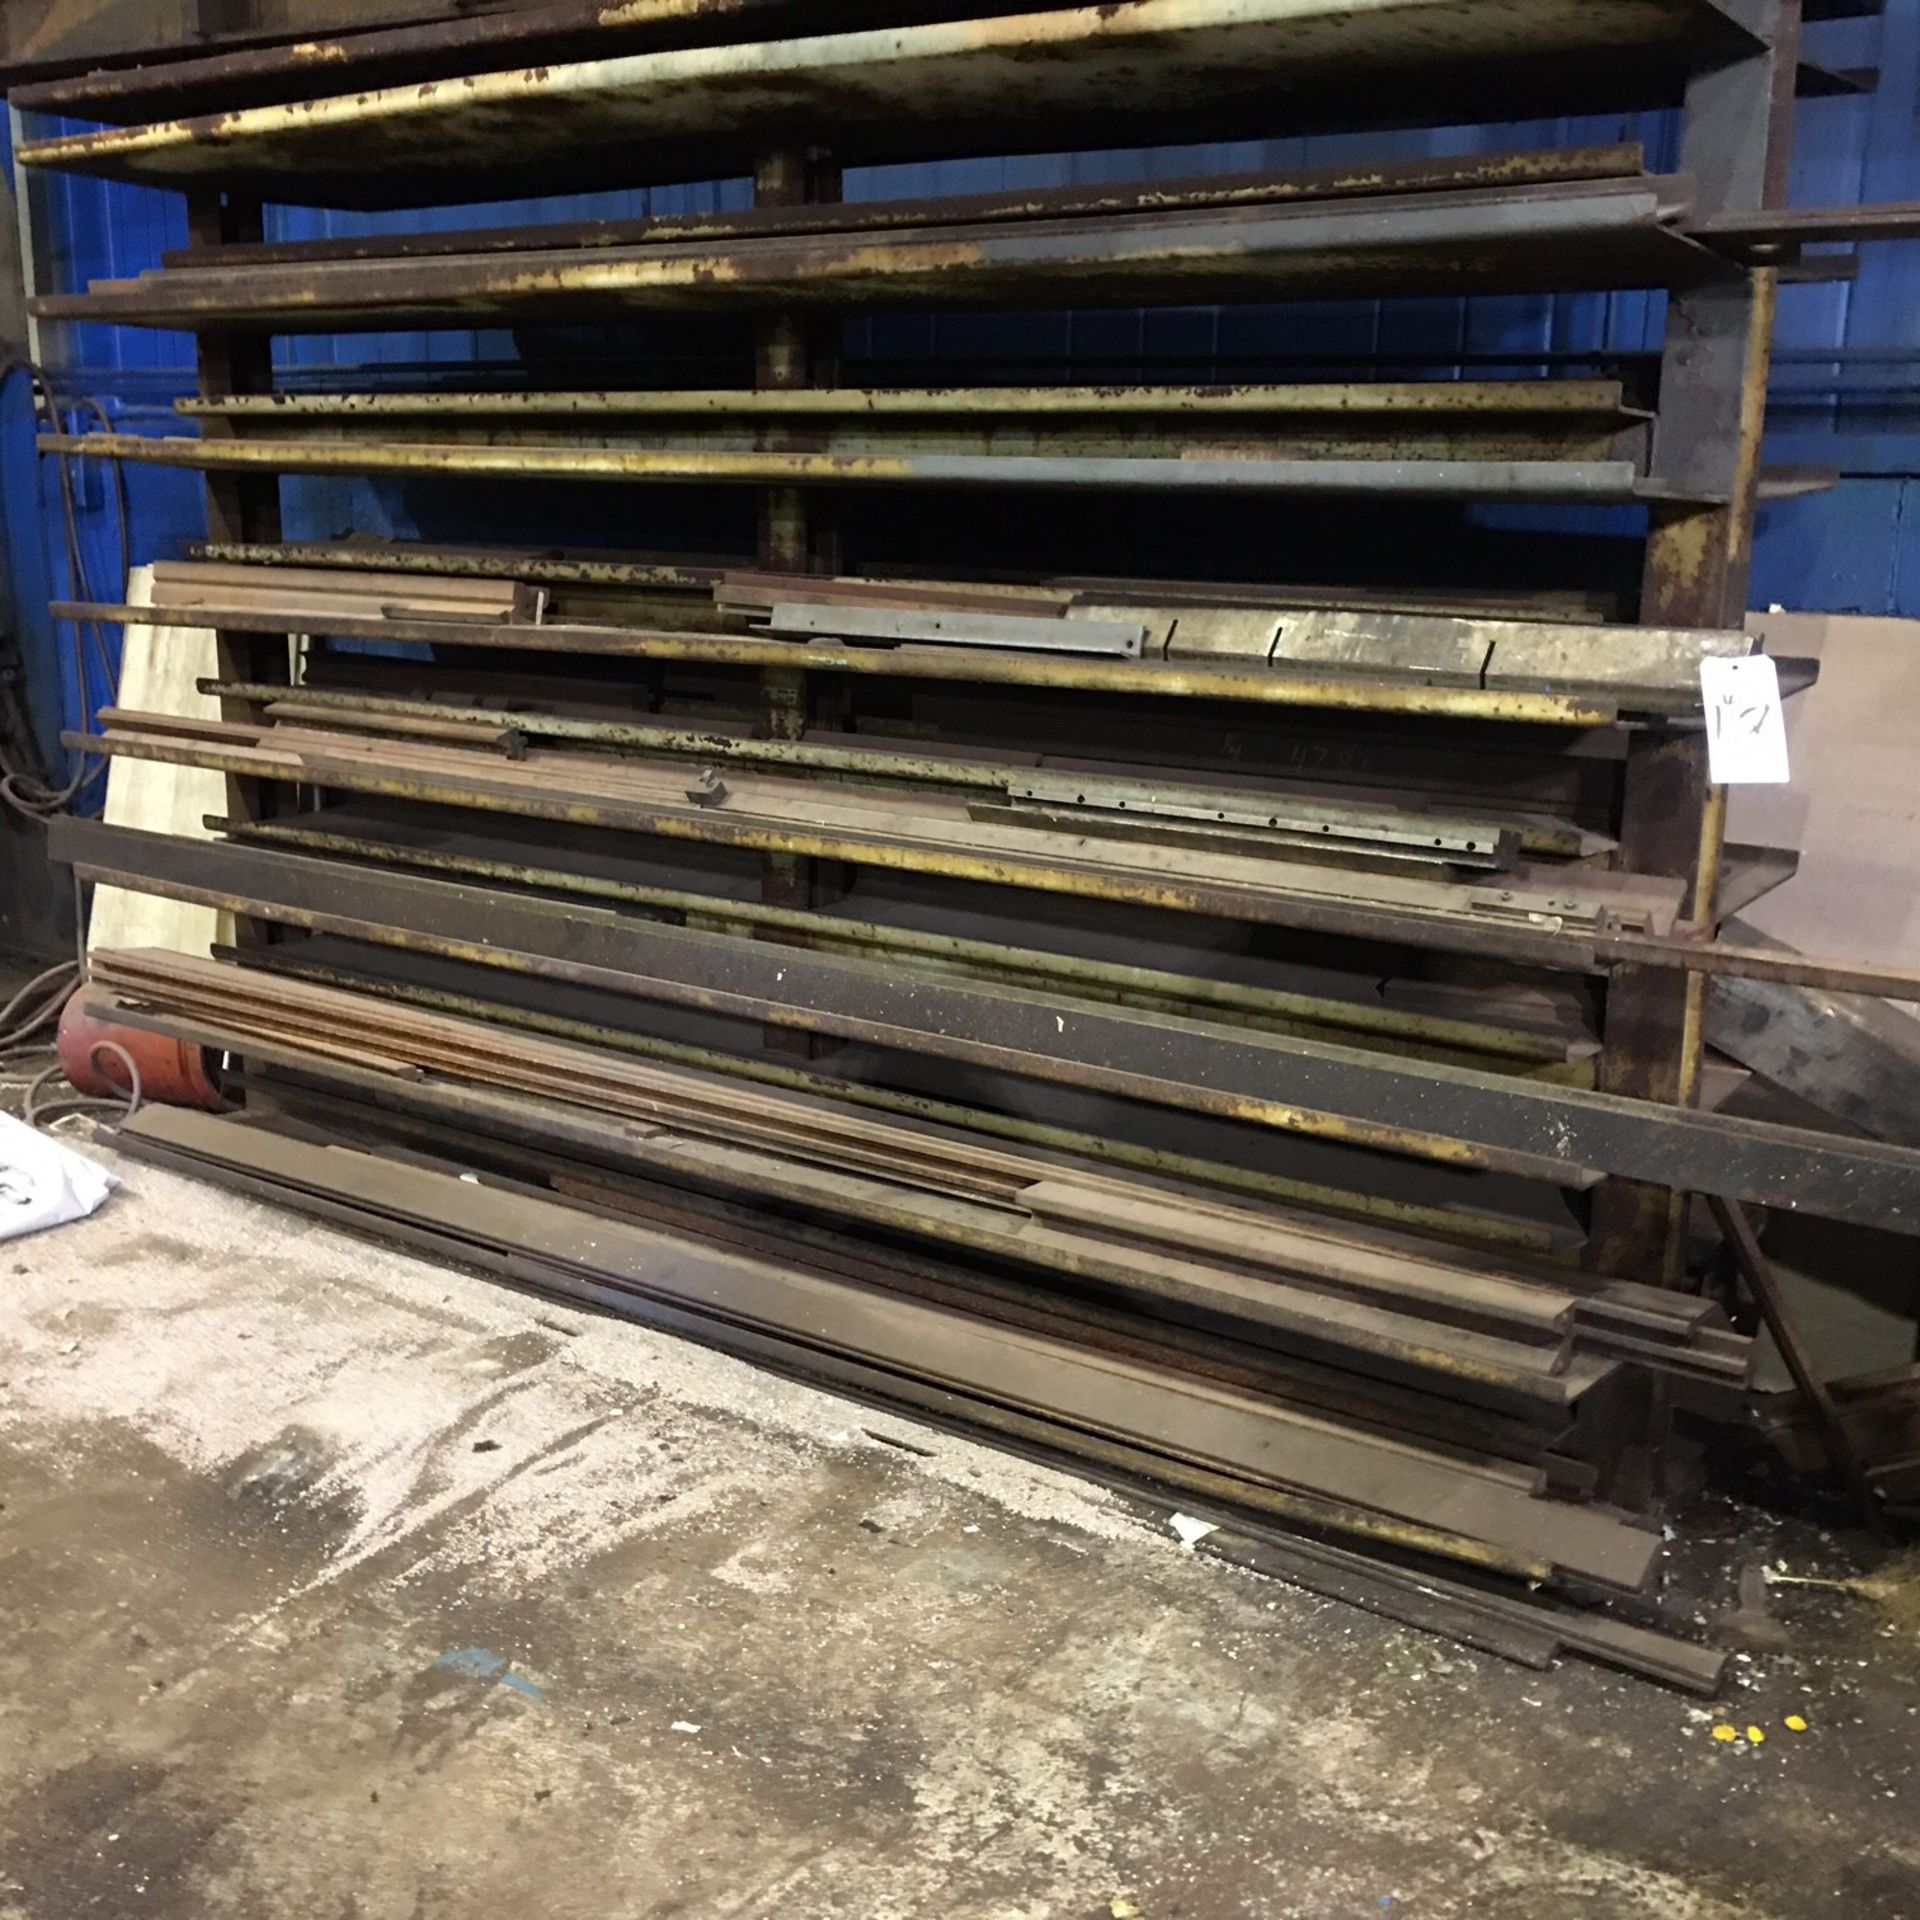 Press Brake Dies (All Types). LOADING FEE FOR THIS LOT: $1000